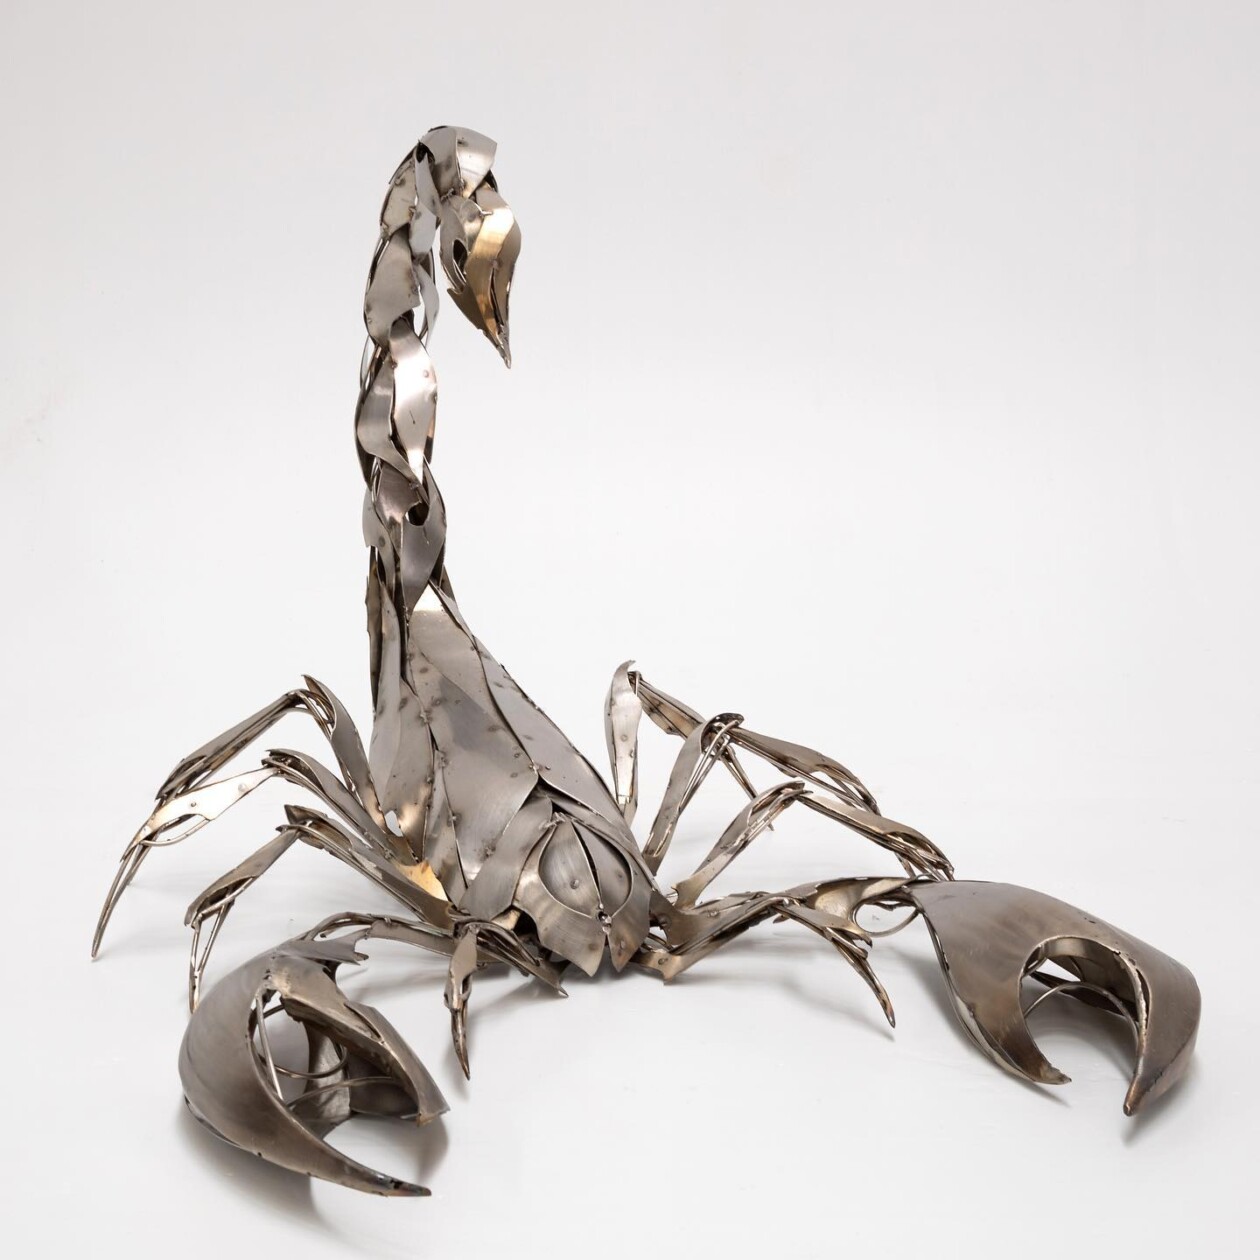 Magnificent Metallic Animal Sculptures Made With Sweeping Lines By Georgie Seccull (10)